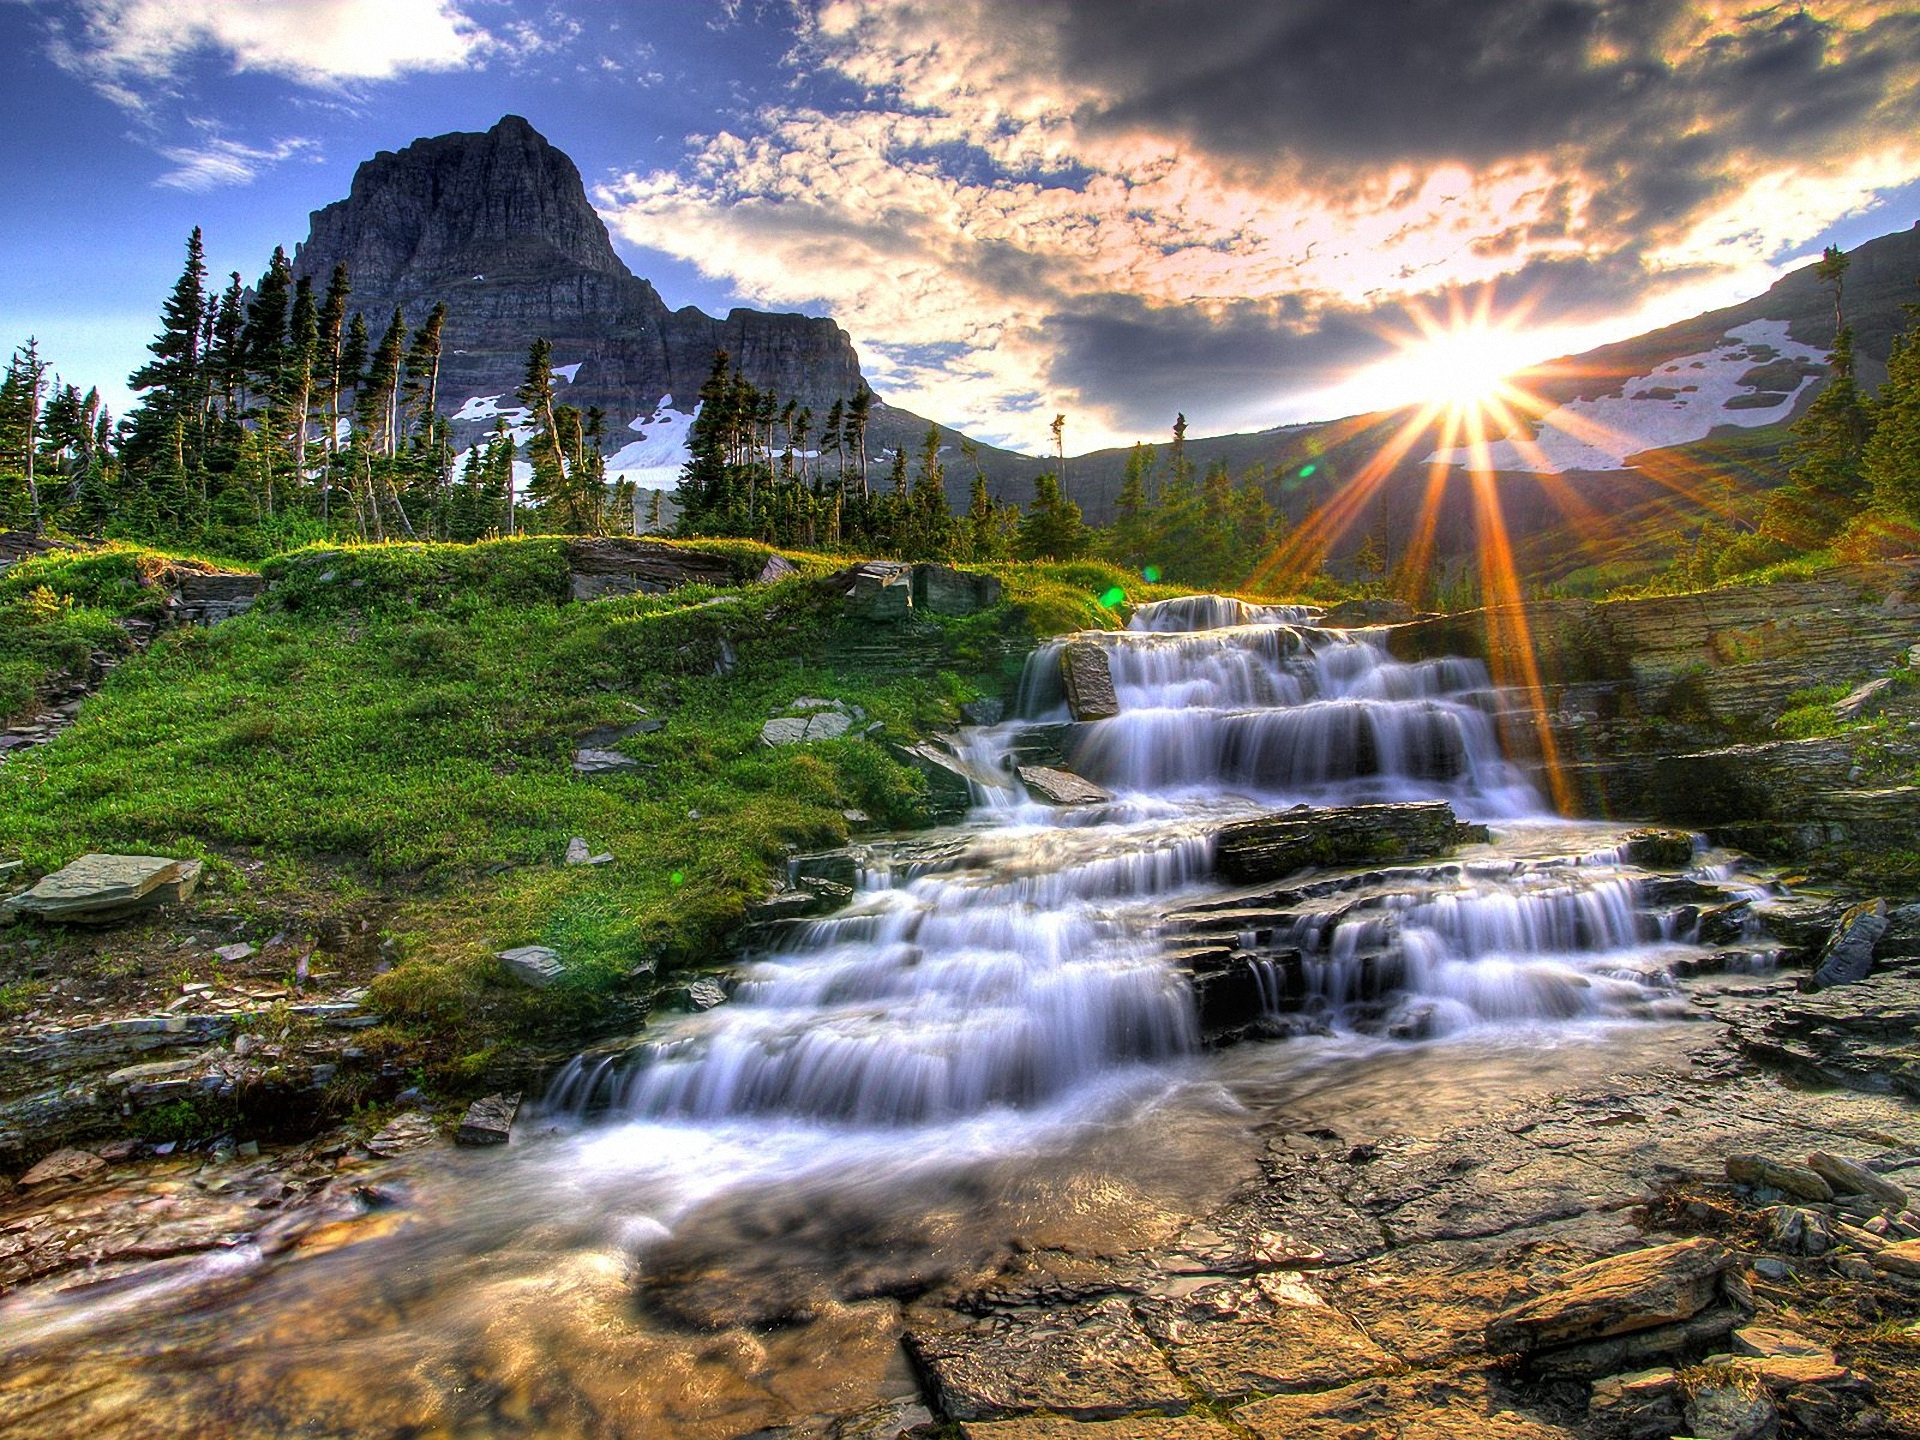 Cascading waterfall with sunlit mountain and stream in serene nature setting.